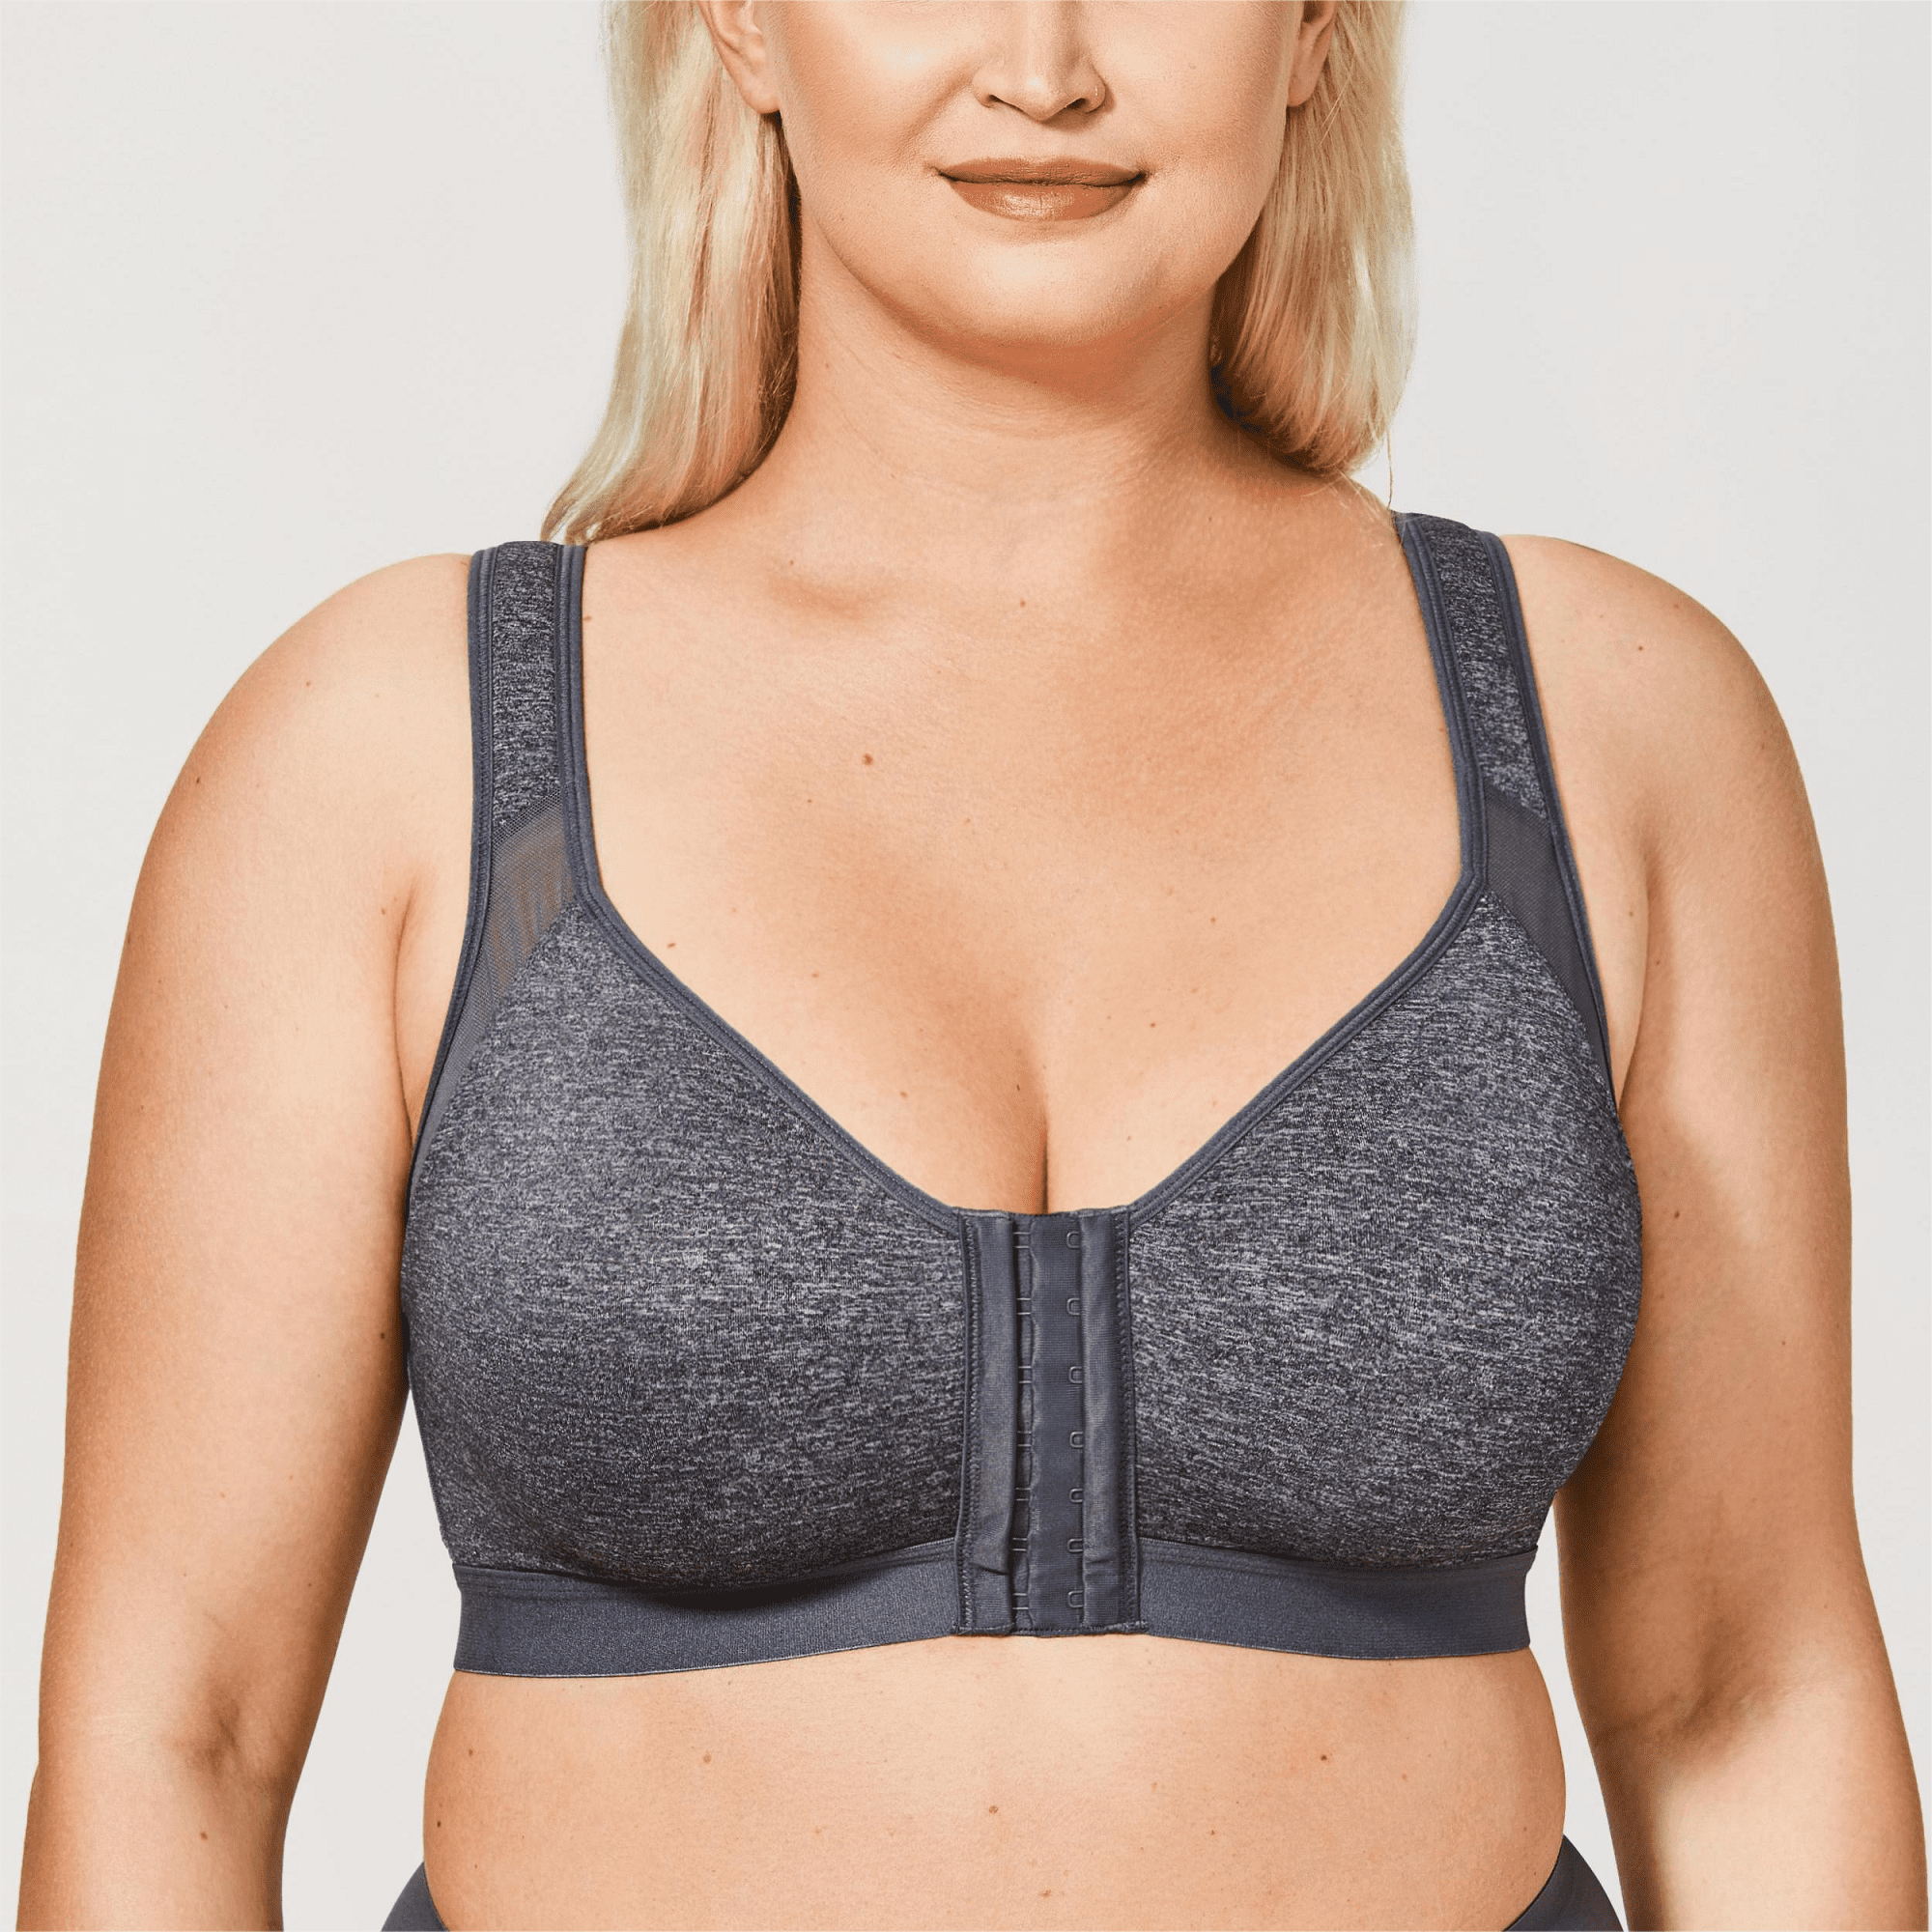 Buy Delimira Women's Front Closure Full Coverage Wirefree